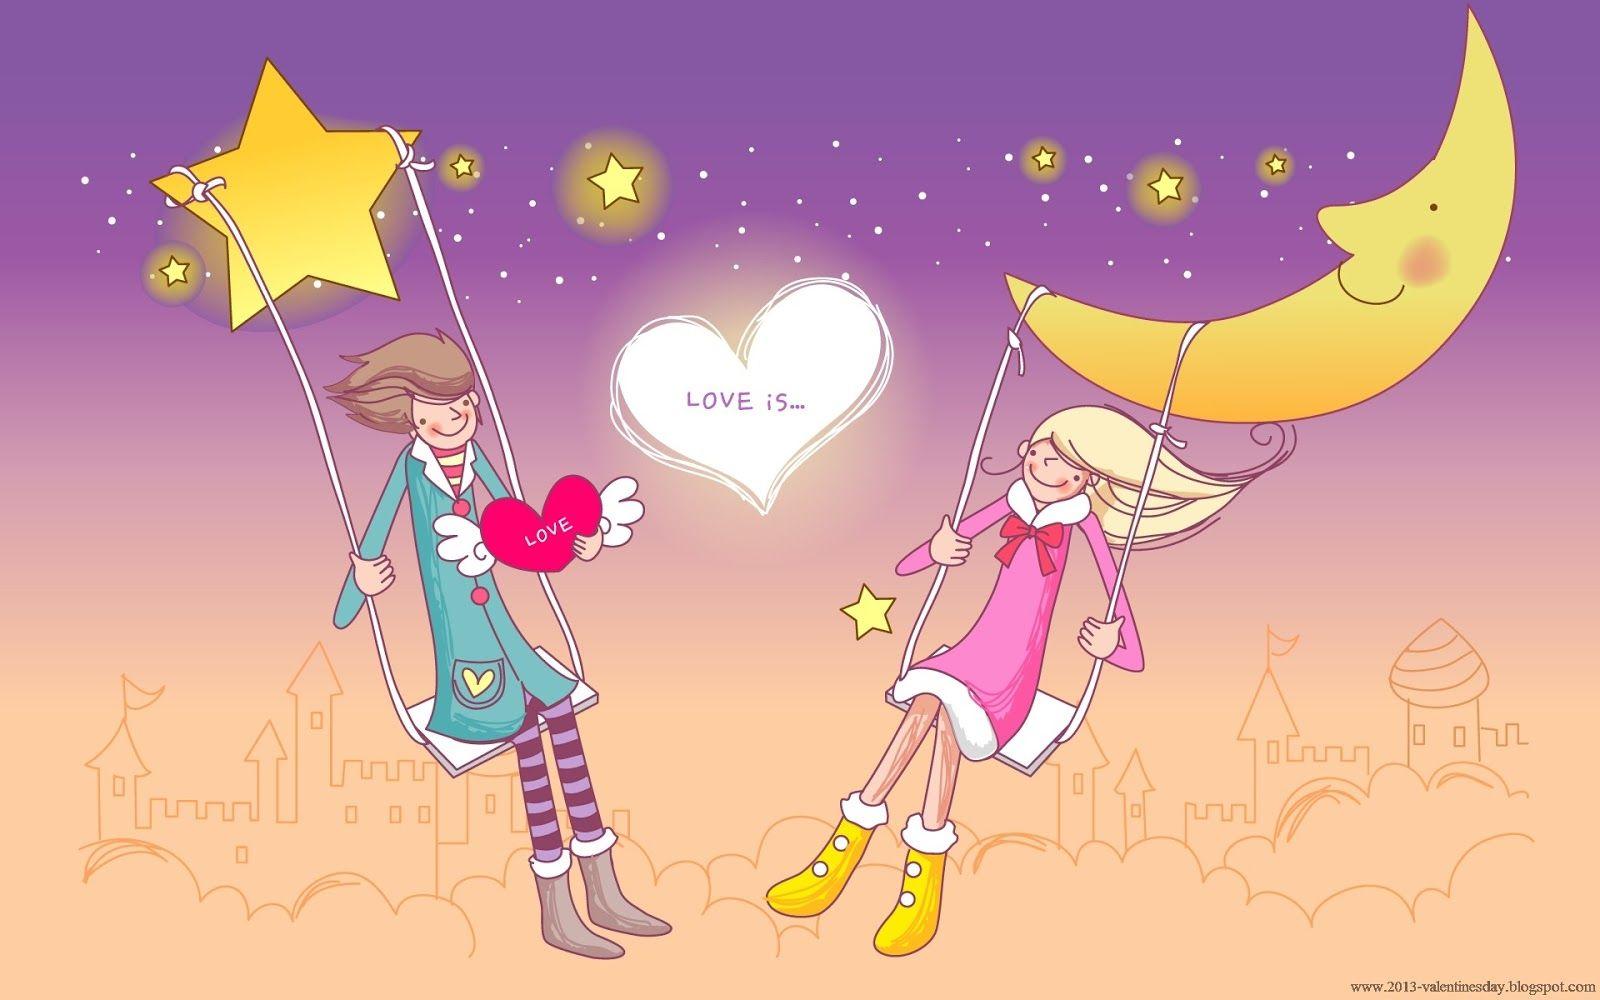 Cutest Couple Quotes. Cute Cartoon Couple Love HD wallpaper for Valentines day. I Love You. Valentines day cartoons, Cute cartoon wallpaper, Cartoon wallpaper